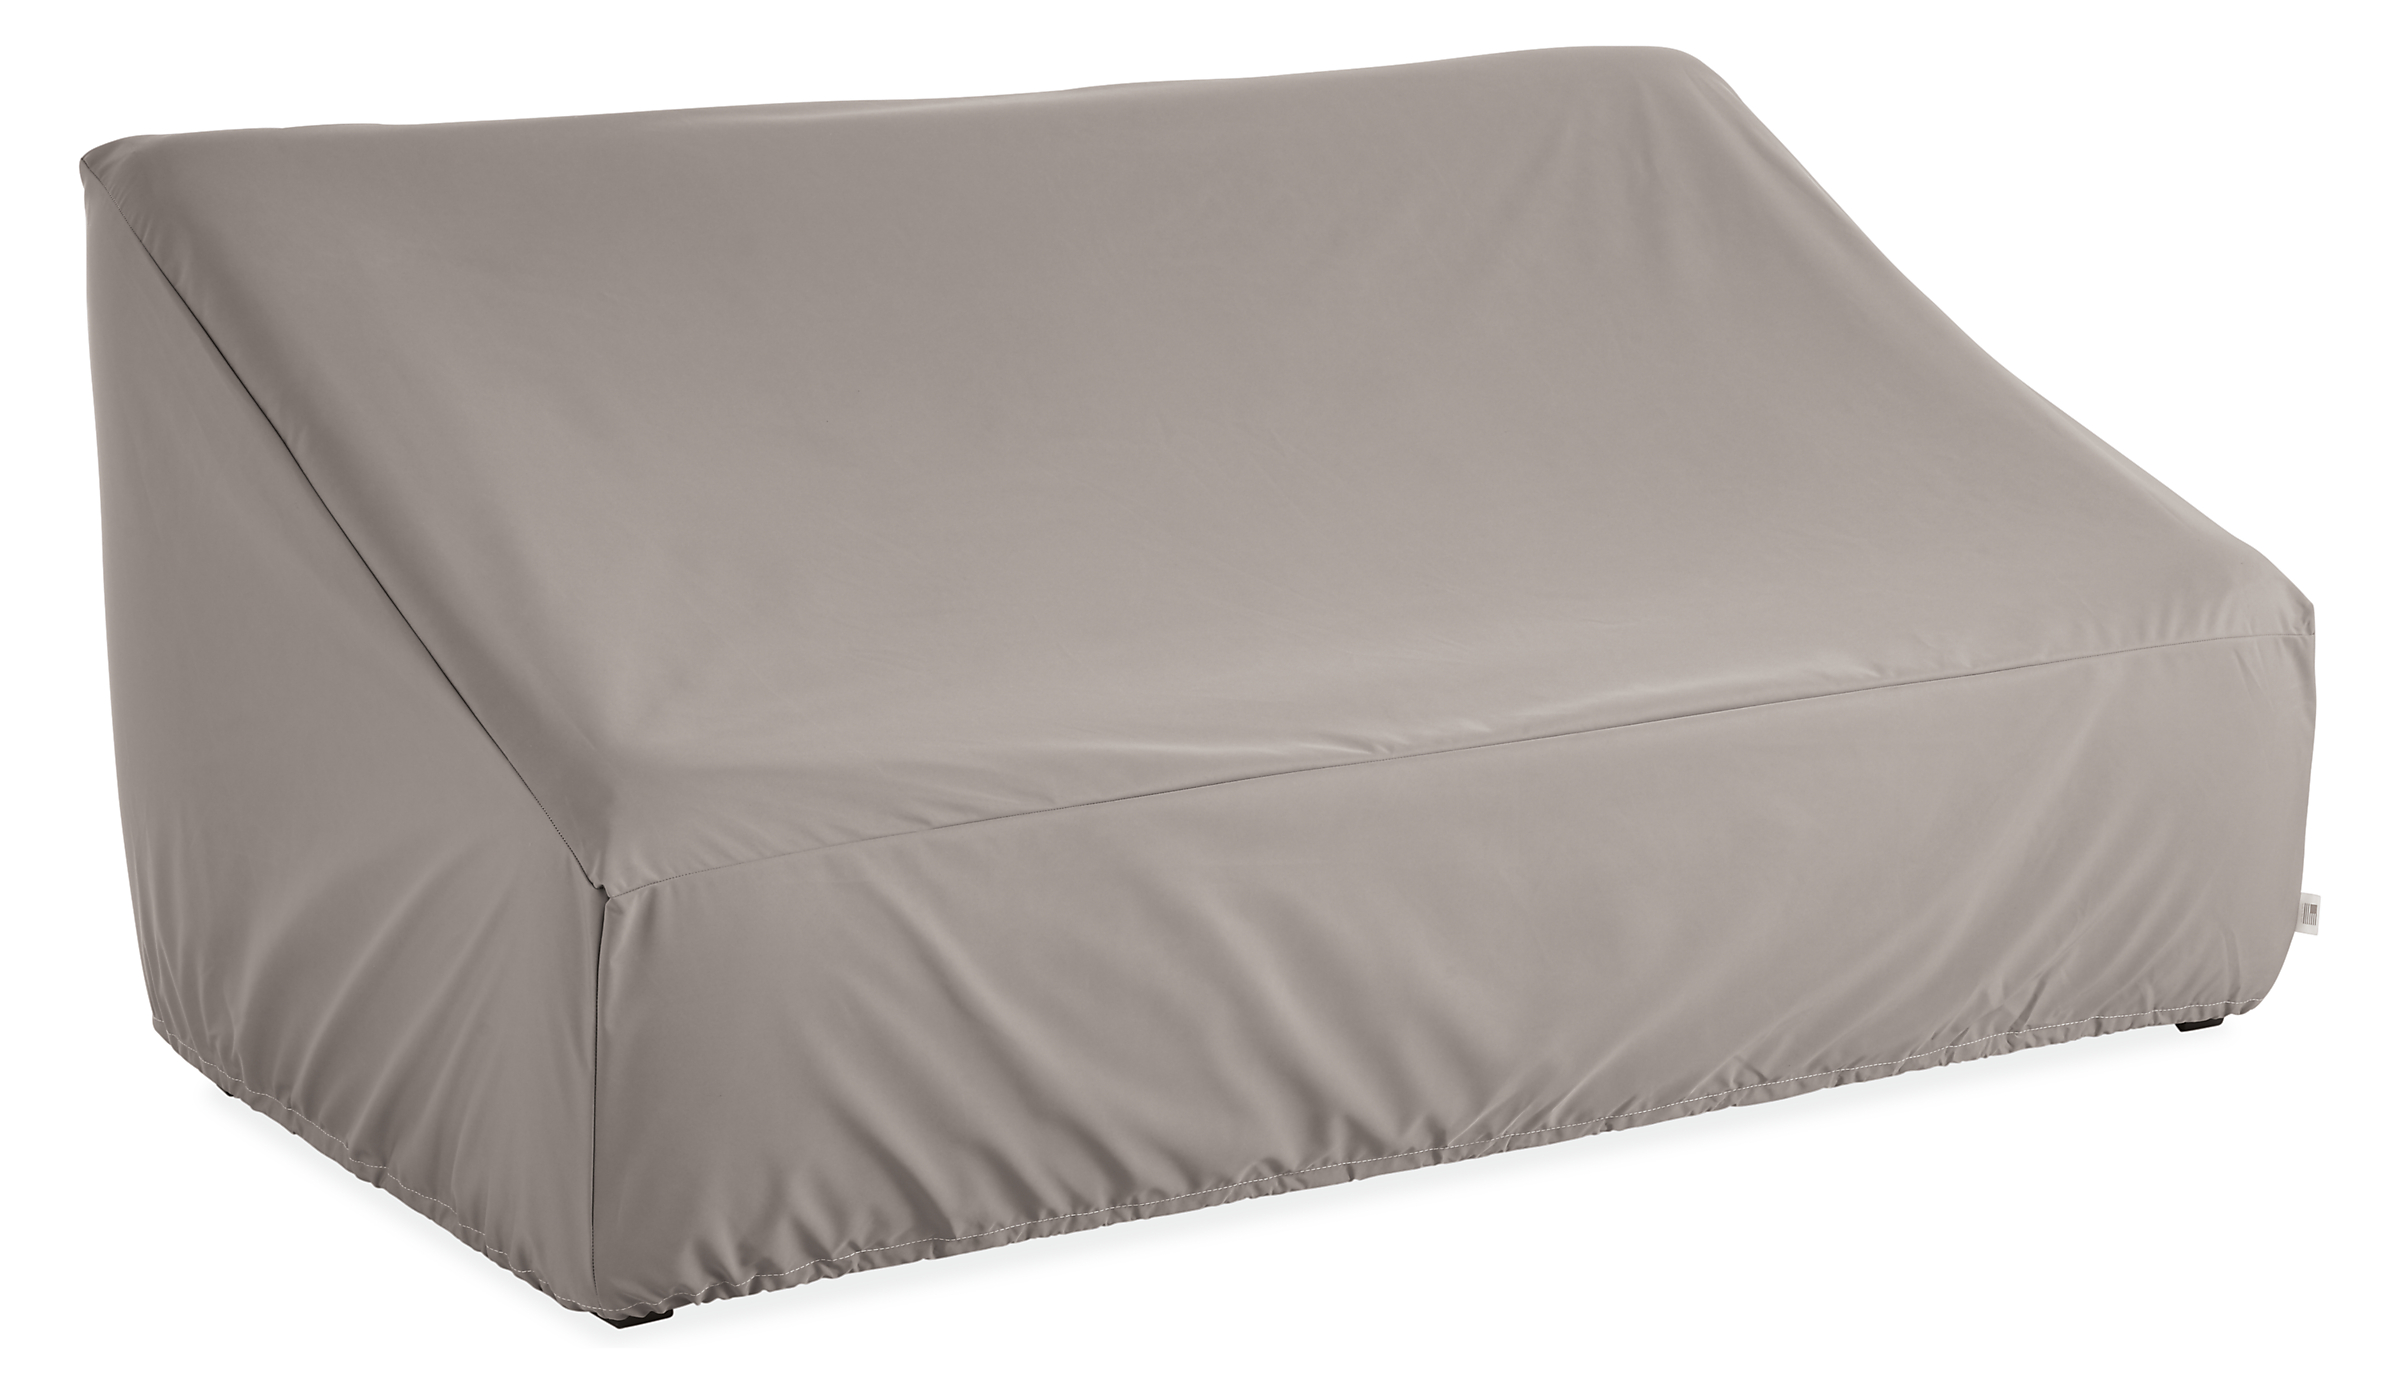 Outdoor Cover for Sofa 79w 39d 29h with Drawstring